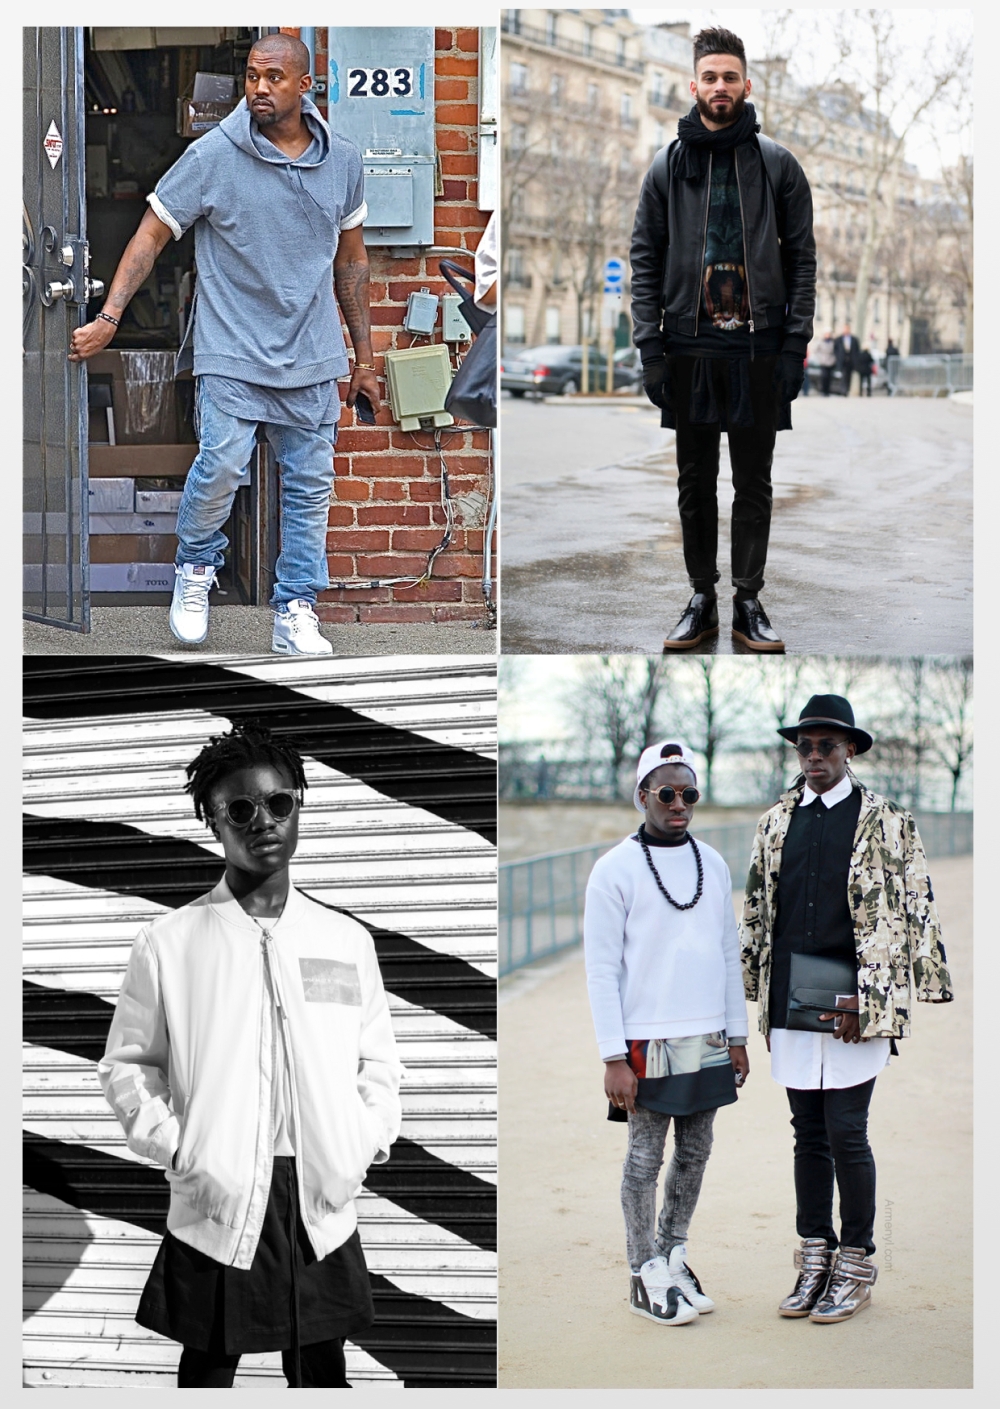 Clockwise: 1) Yeezy, one of the forerunners of the look outfitted in his A.P.C collab 2) Street Style perfection 3) Ian Connor x 424 Fairfax 4) Live on the streets of Paris (credit: Armenyl)